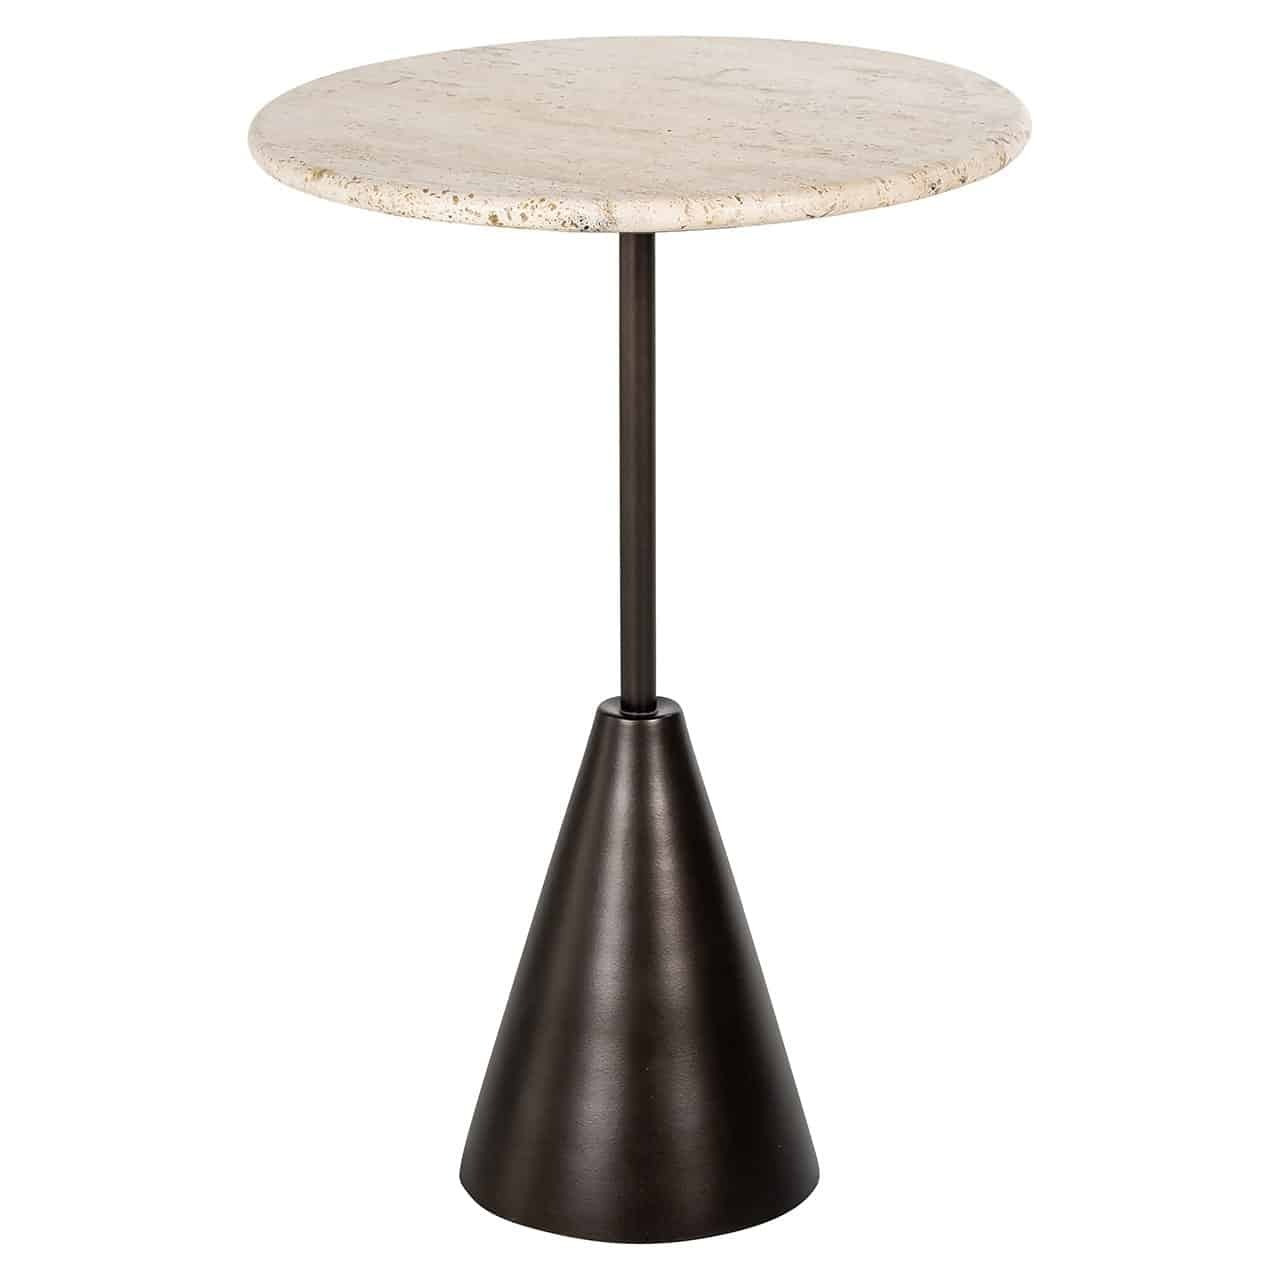 Richmond Interiors Avalon Round Side Table in Bronze - image 1